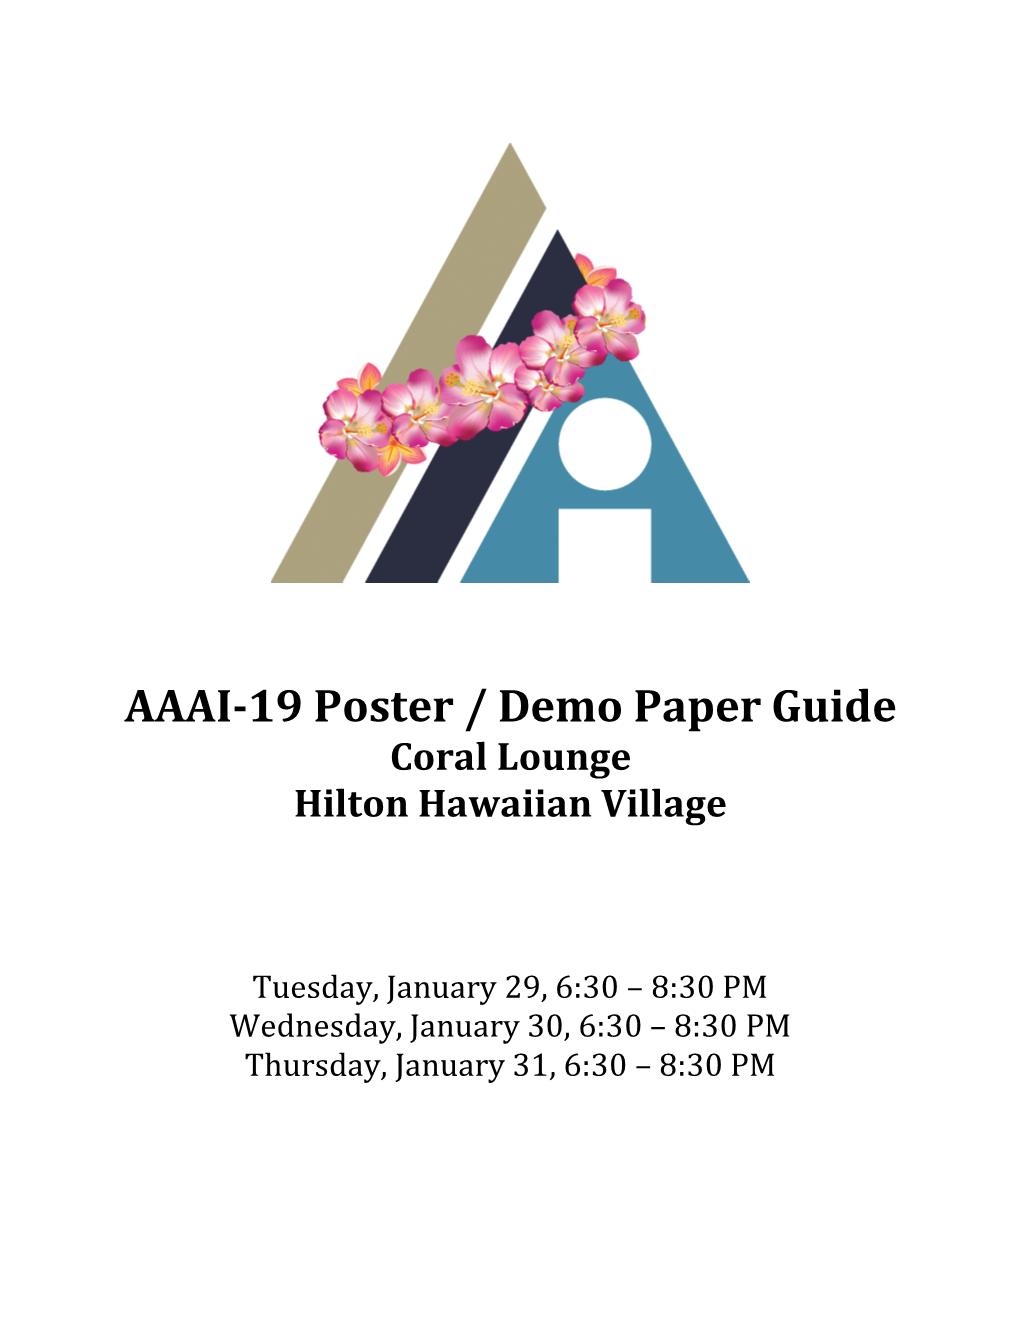 AAAI-19 Poster Demo Guide Flyer.1.16.19